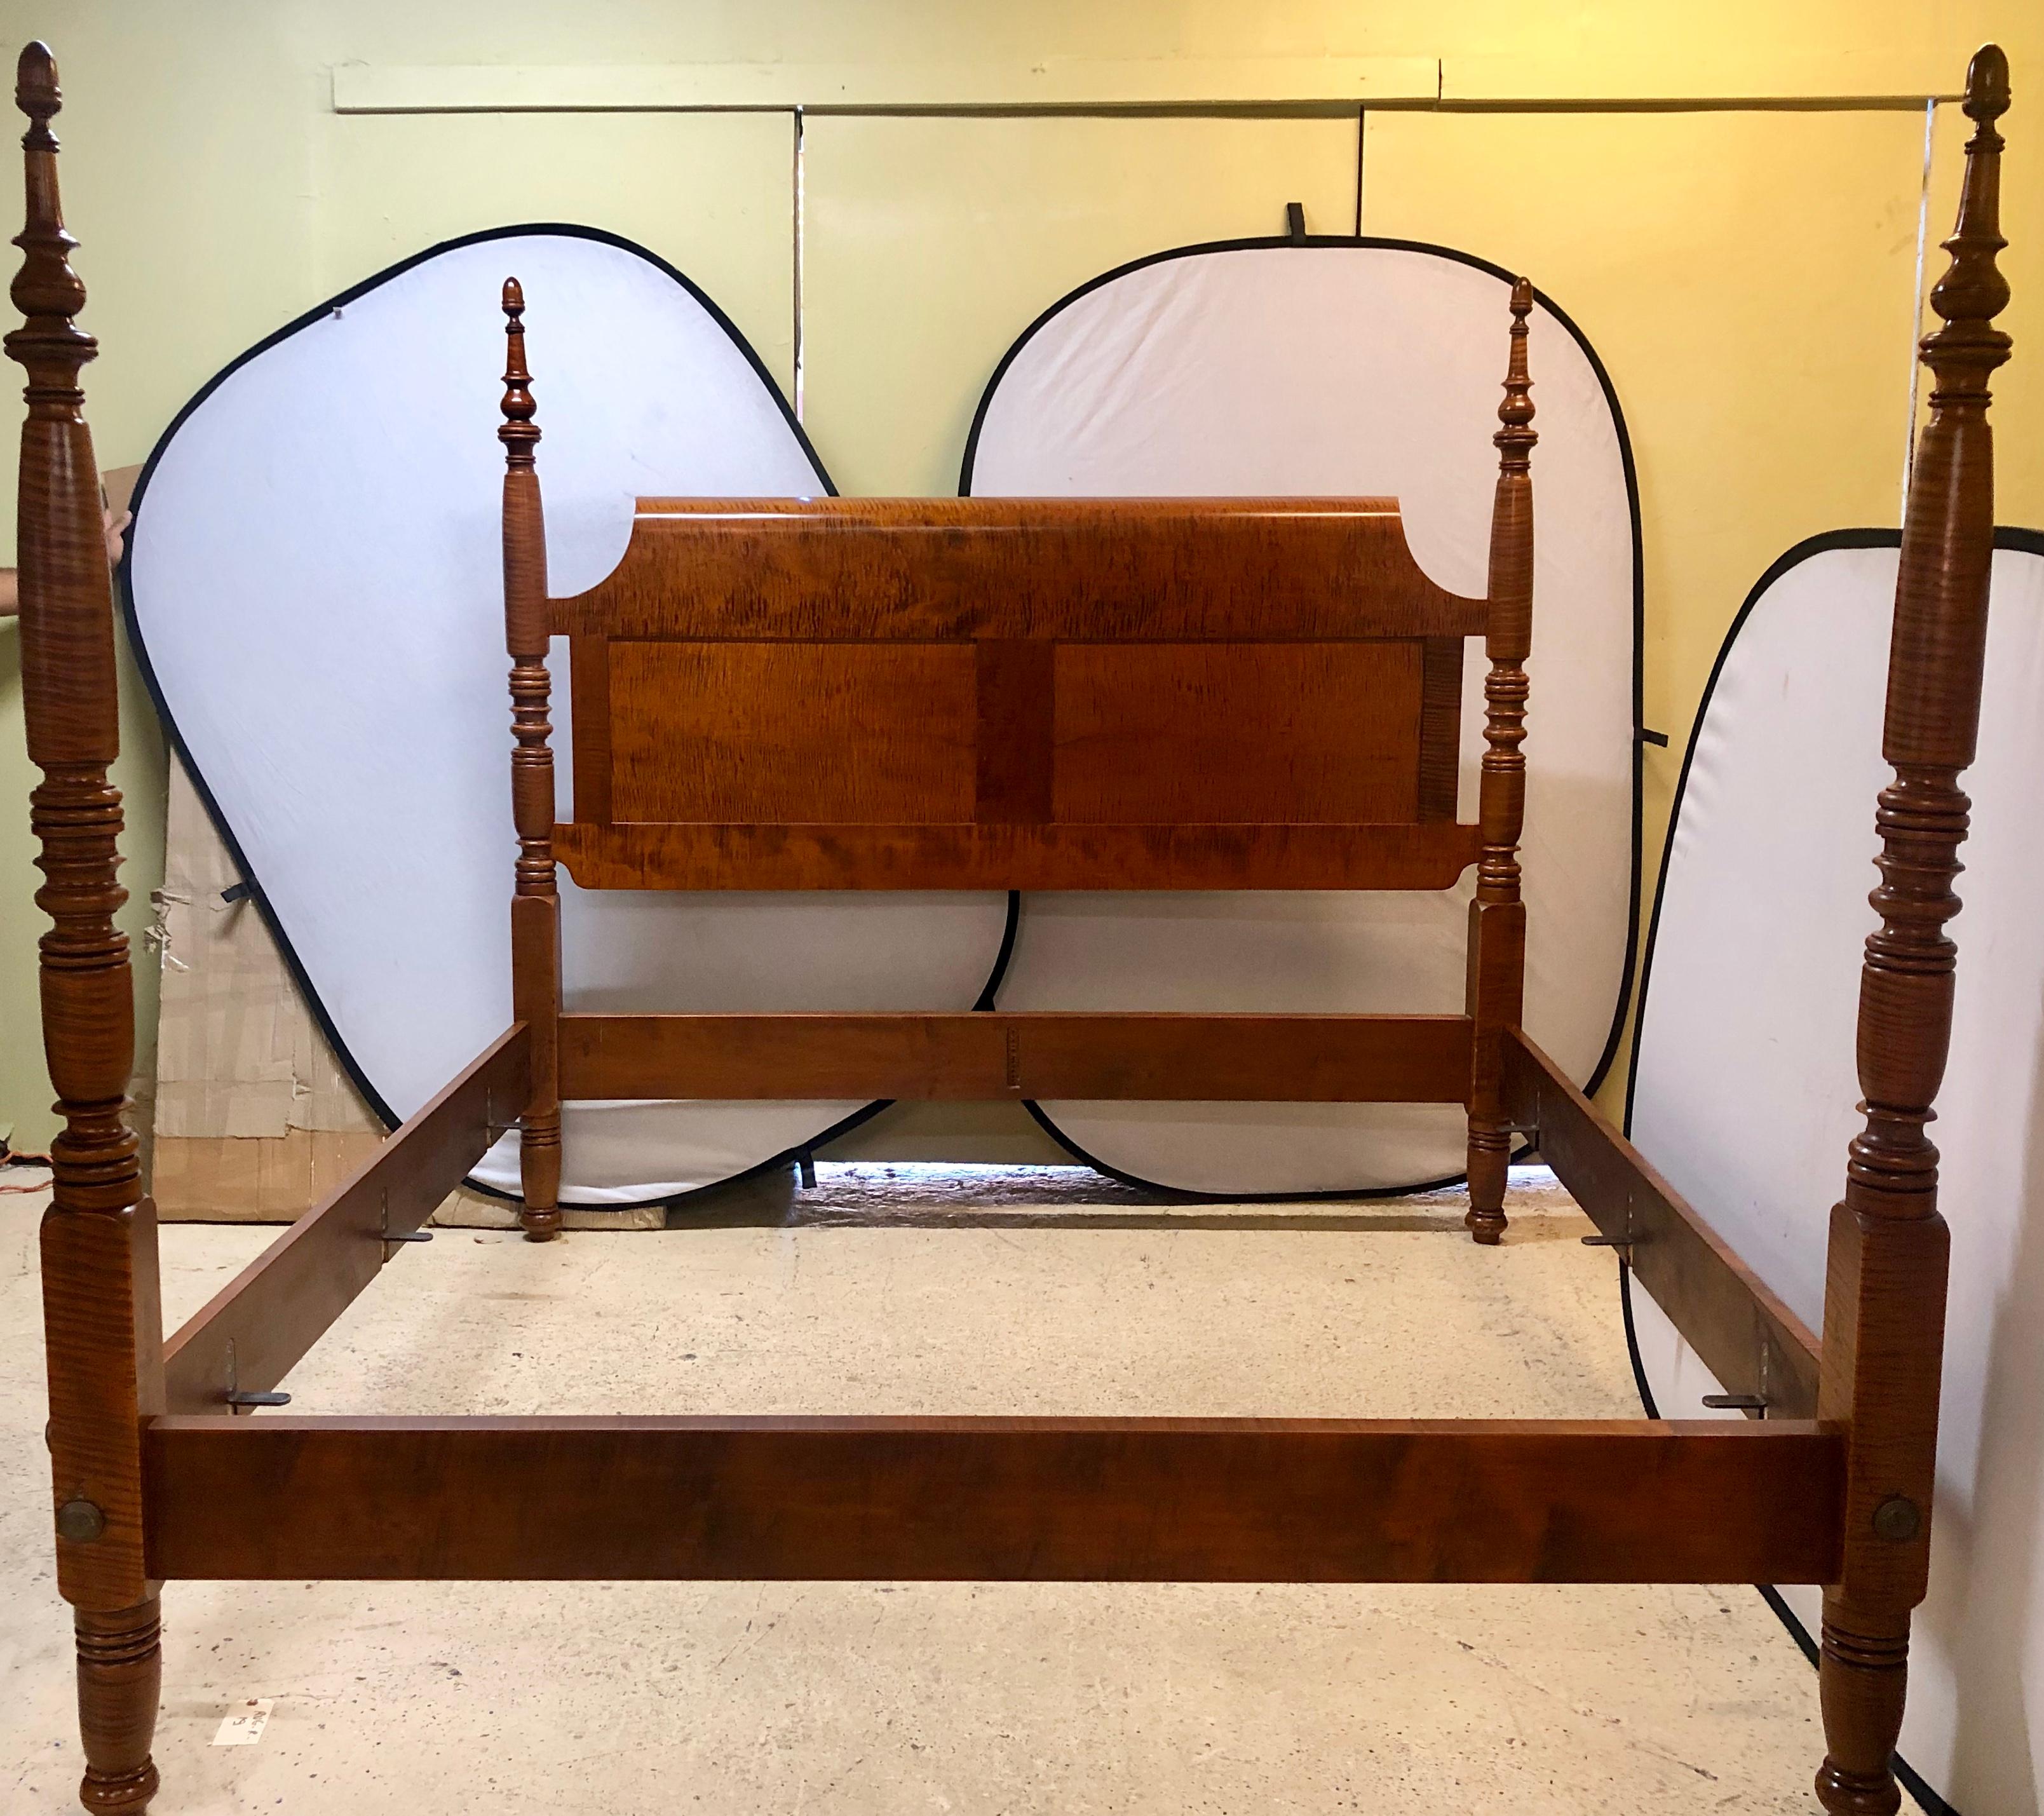 A 19th century custom king sized burled walnut our poster bed. Leonards Sackonk, MA custom made bed for the person actually named on the bed. Complete with center rail and all hardware. Price at time of purchase 2015 $17,500.

Leonards New